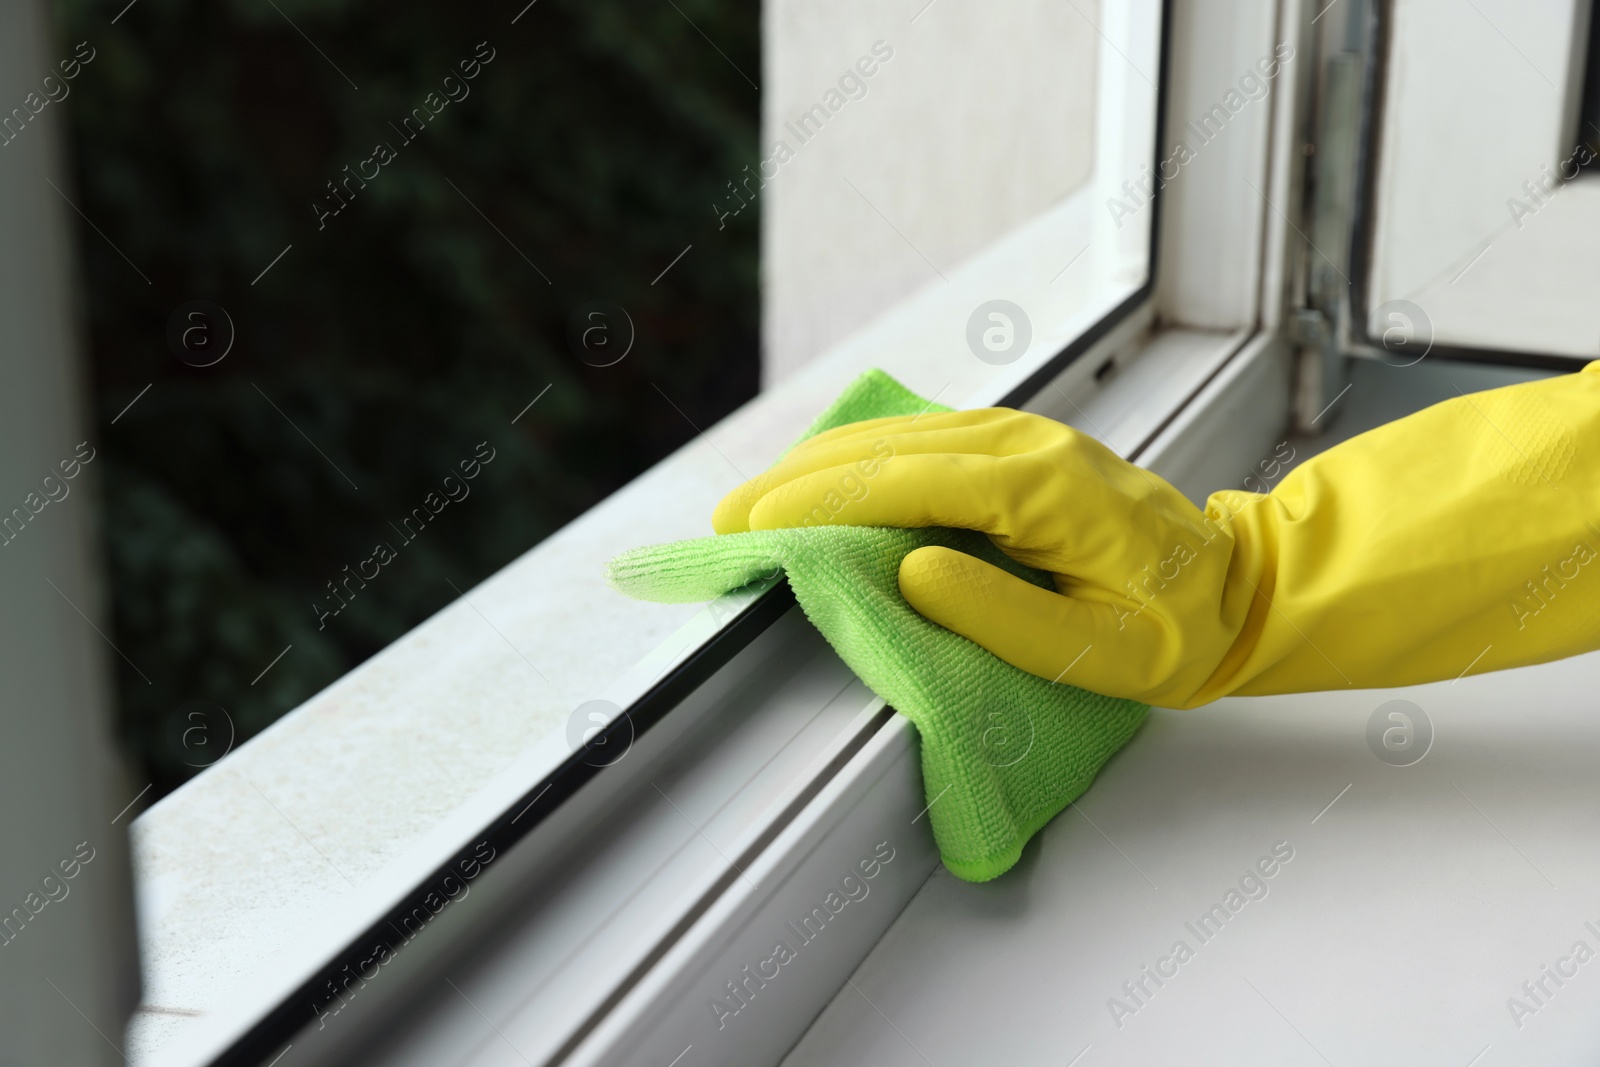 Photo of Woman cleaning window with rag indoors, closeup